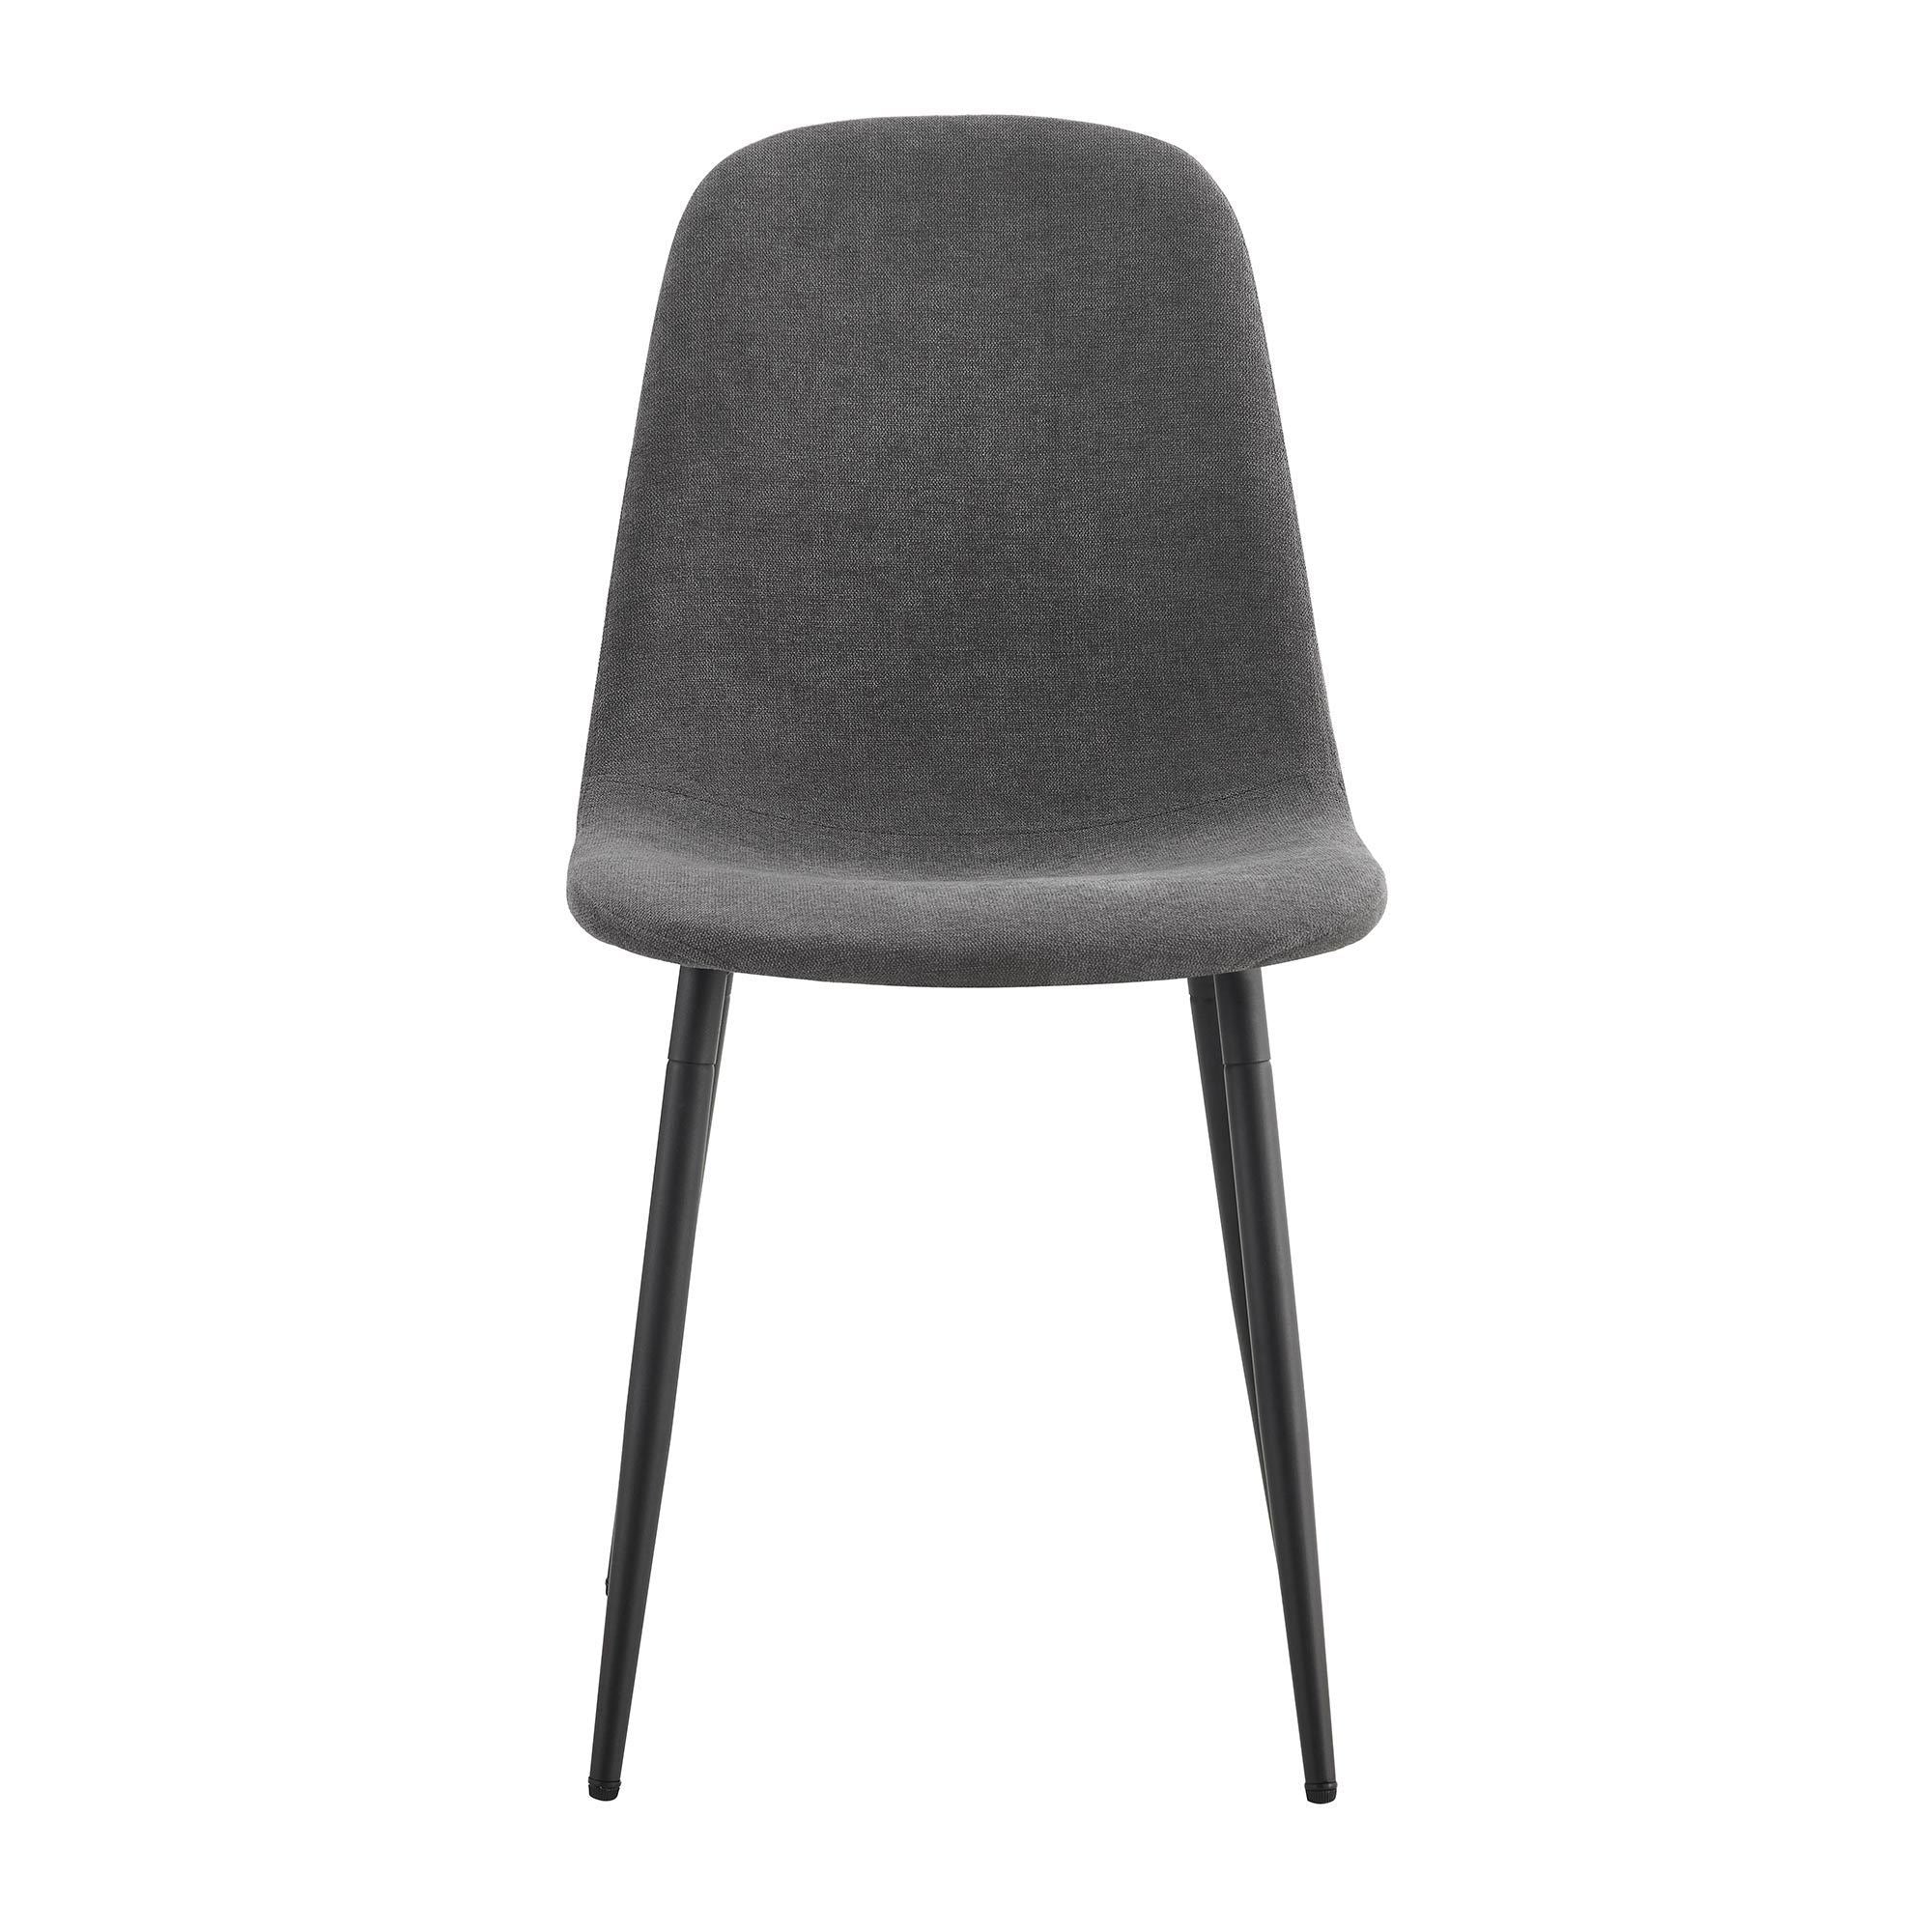 Set of 6 Gray Linen Upholstered Dining Chairs with Black Metal Legs